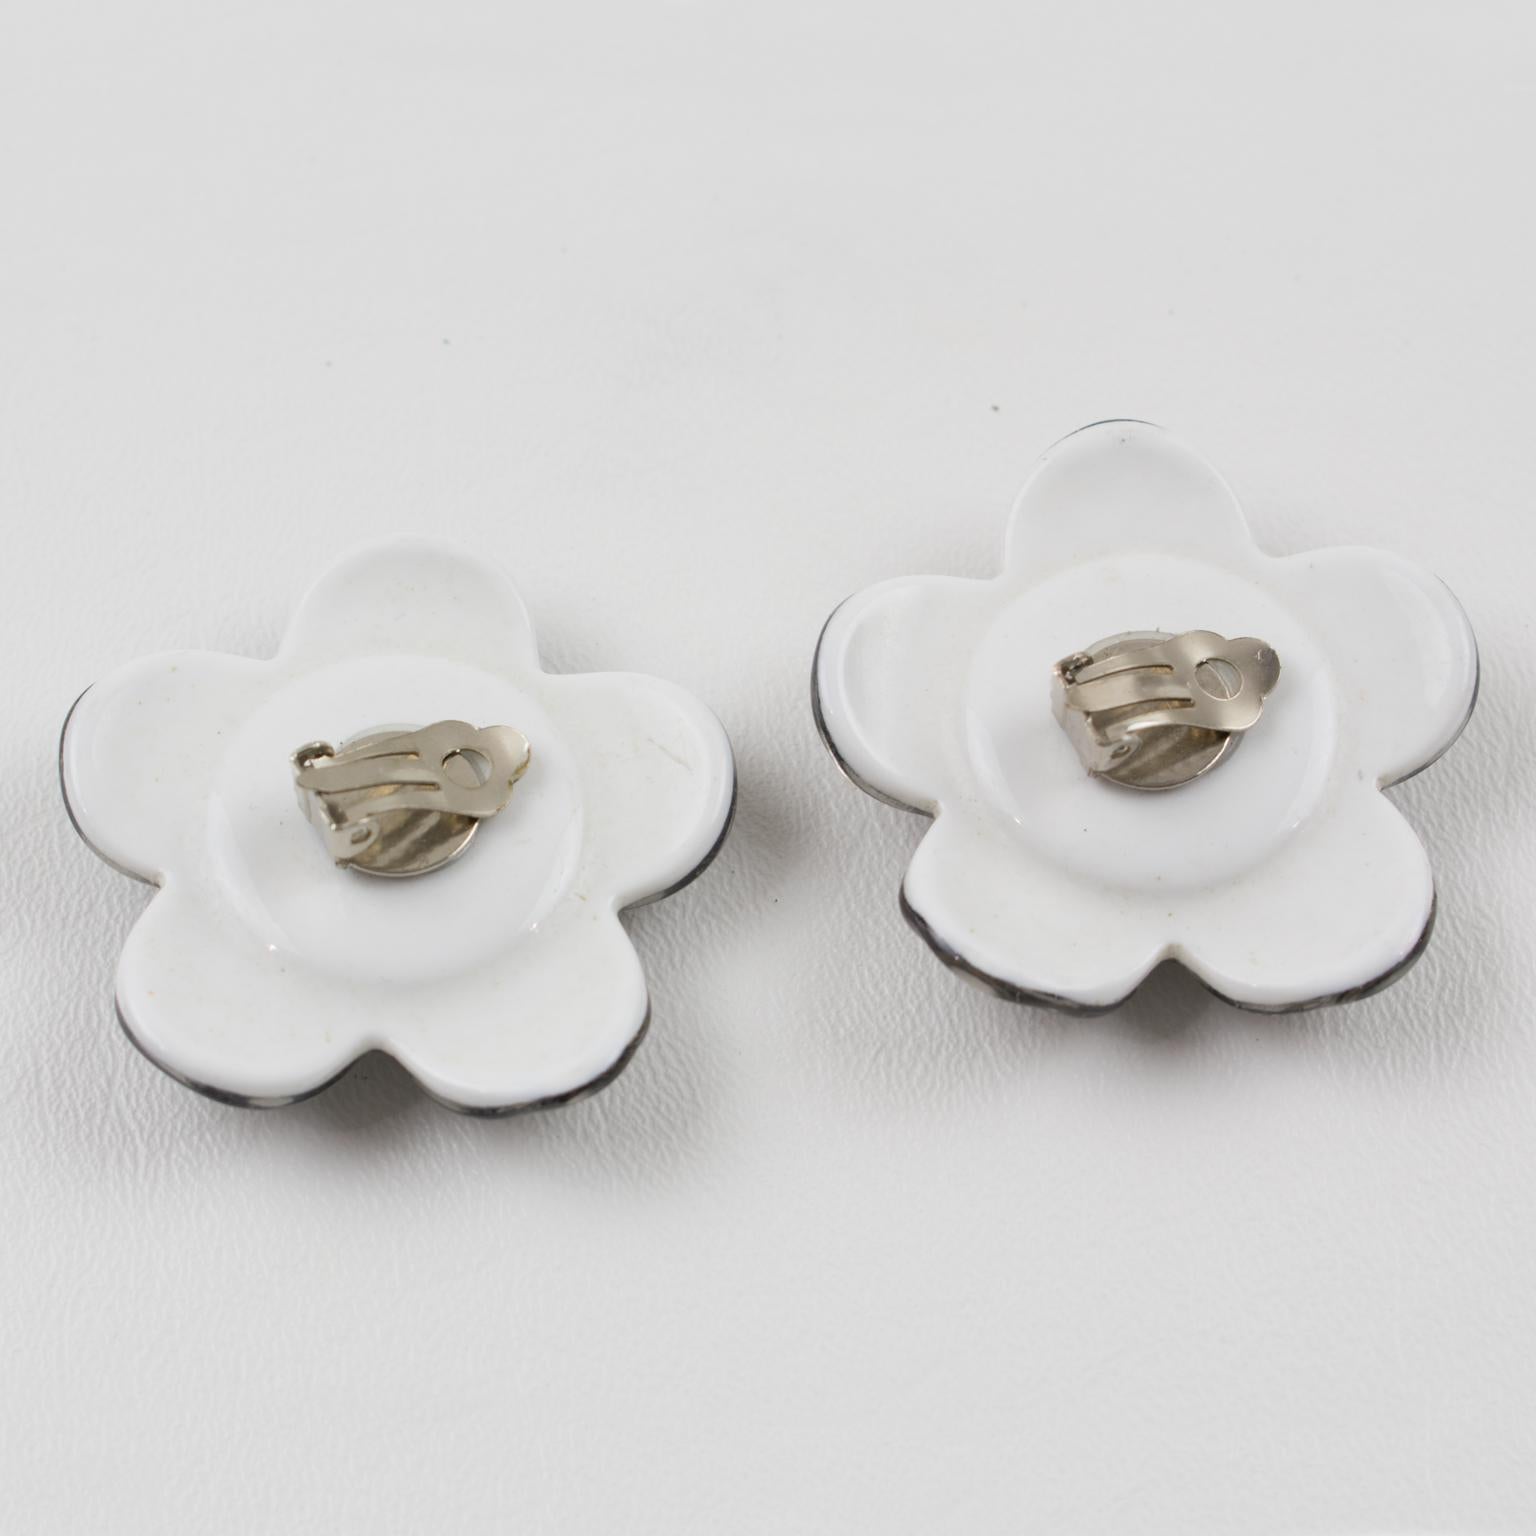 Lucite Clip Earrings Black and White Checkerboard Daisy Flower In Excellent Condition For Sale In Atlanta, GA